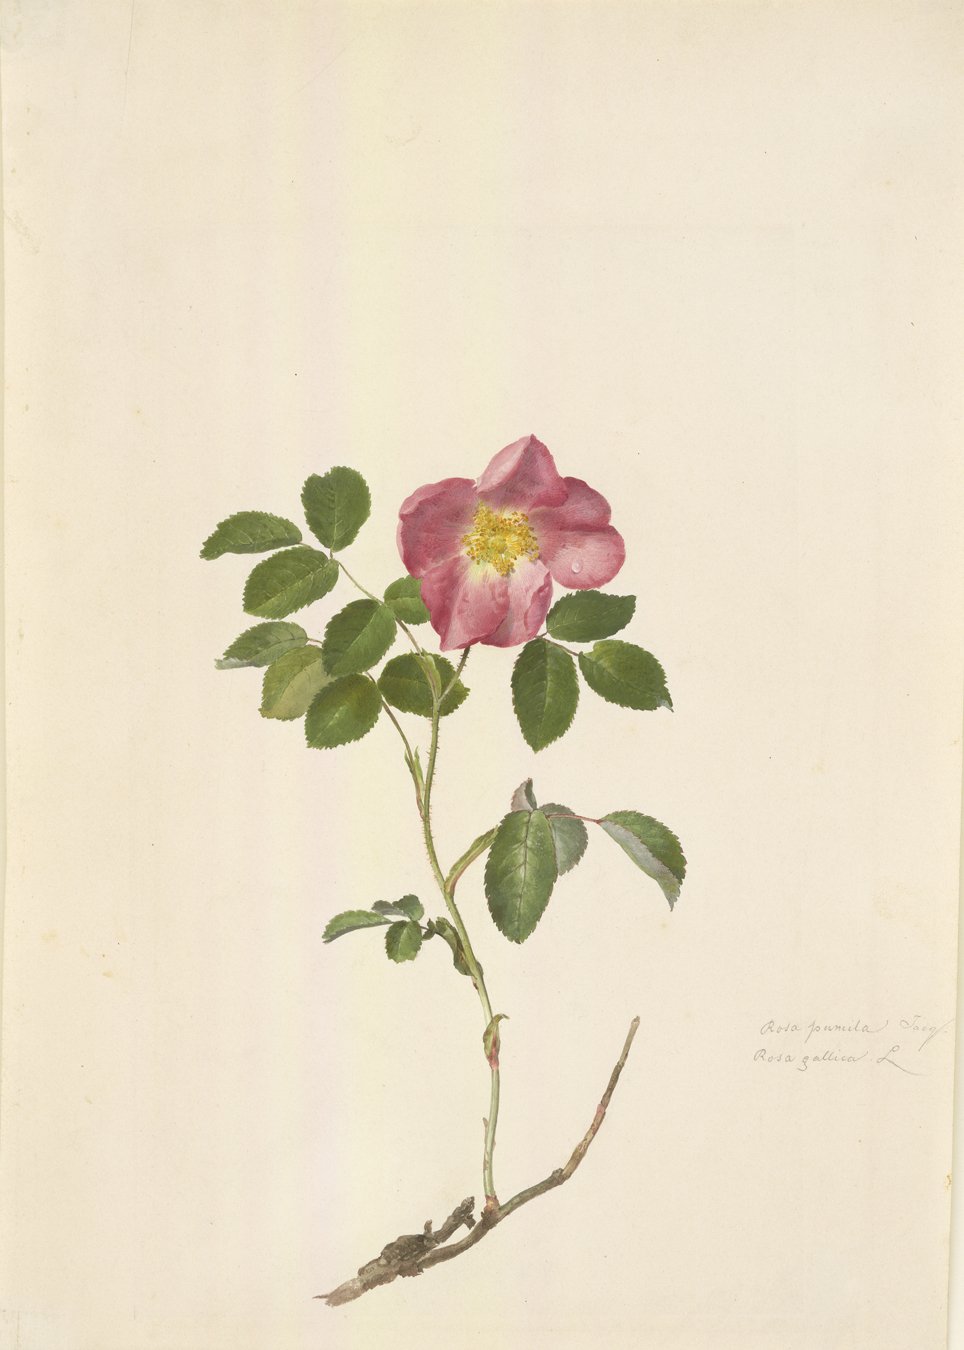 The sand-coloured vertical format paper shows the lifelike image of a rose. Almost at the end of the main branch, of which only a small part can be seen, is a side branch with small and already fully grown lush green leaves. At the end of the branch is a flower with pink leaves. The rose is open and turned towards the viewer. Its bright yellow stamens form the round centre of the flower. To the right of the rose, in the lower area, is a two-line inscription, but it is too small to be deciphered with the naked eye.